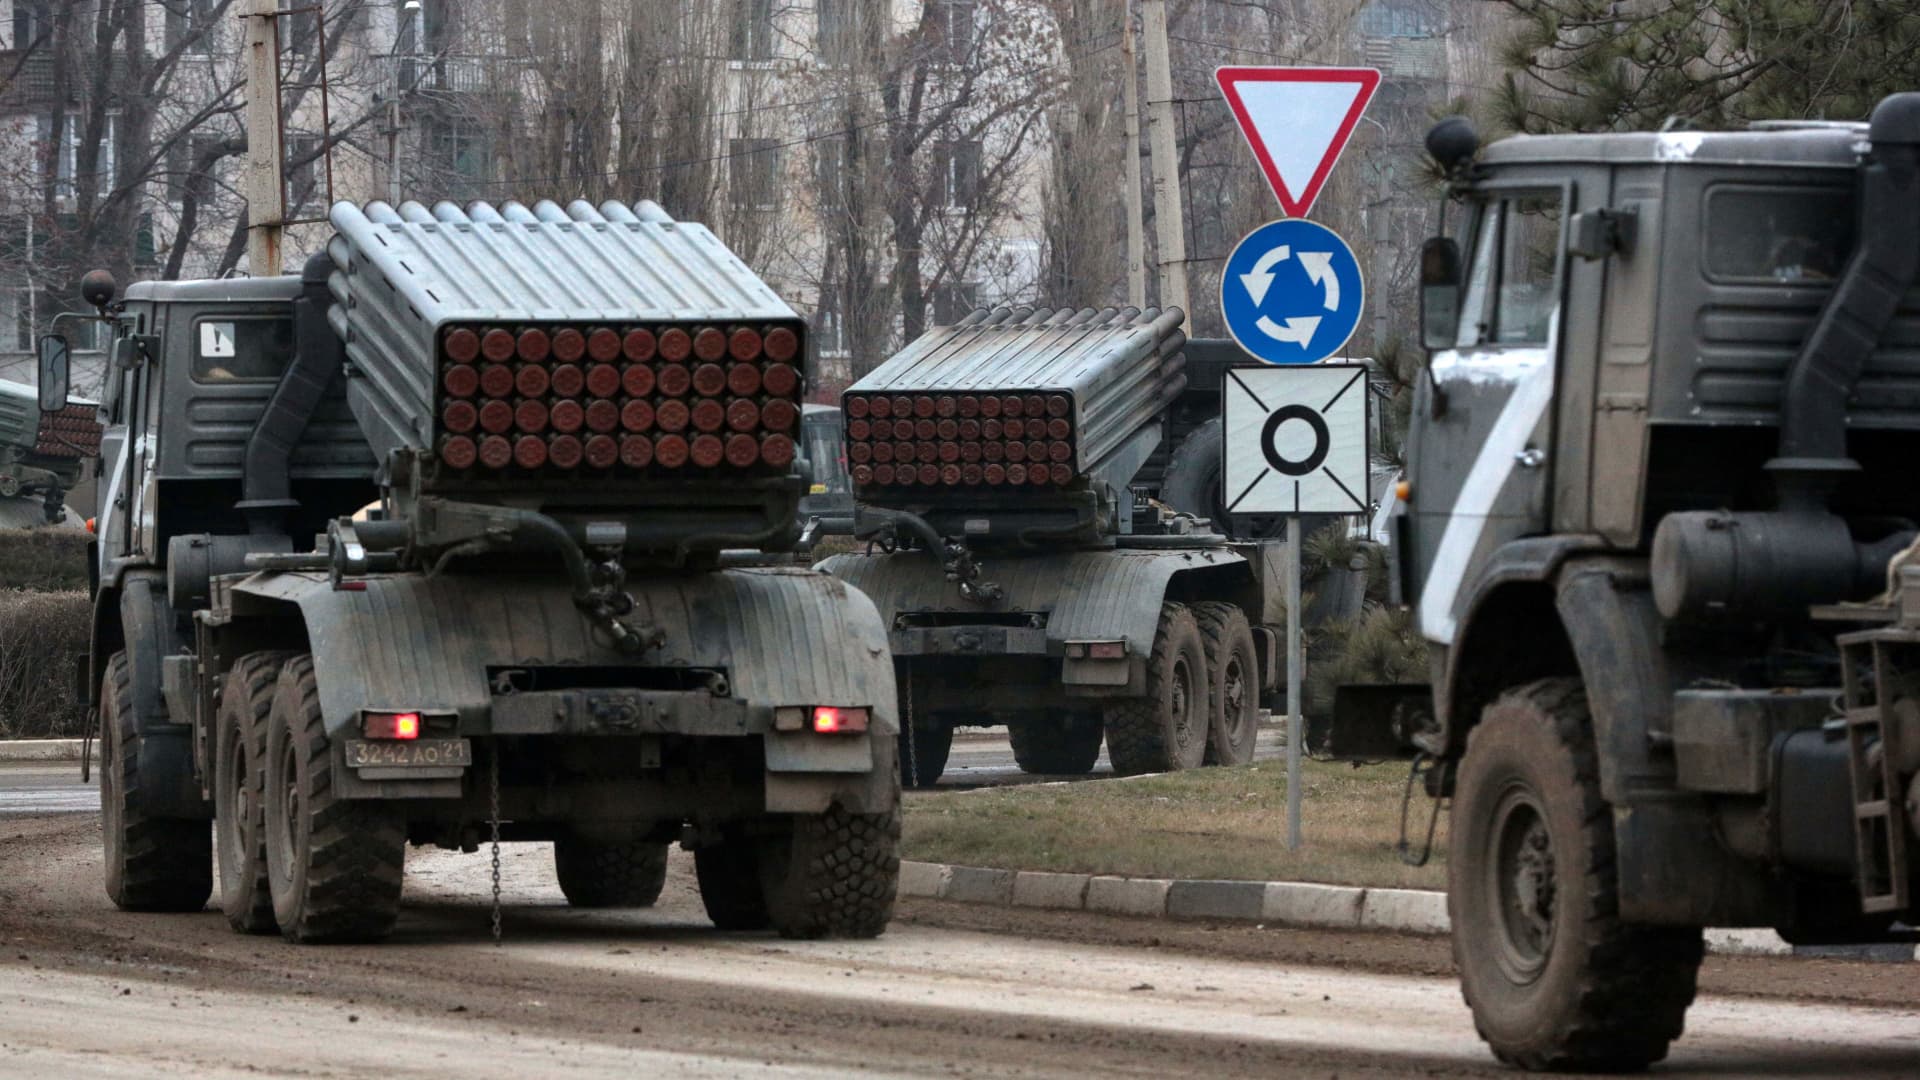 Russian army military vehicles are seen in Armyansk, Crimea, on February 25, 2022.